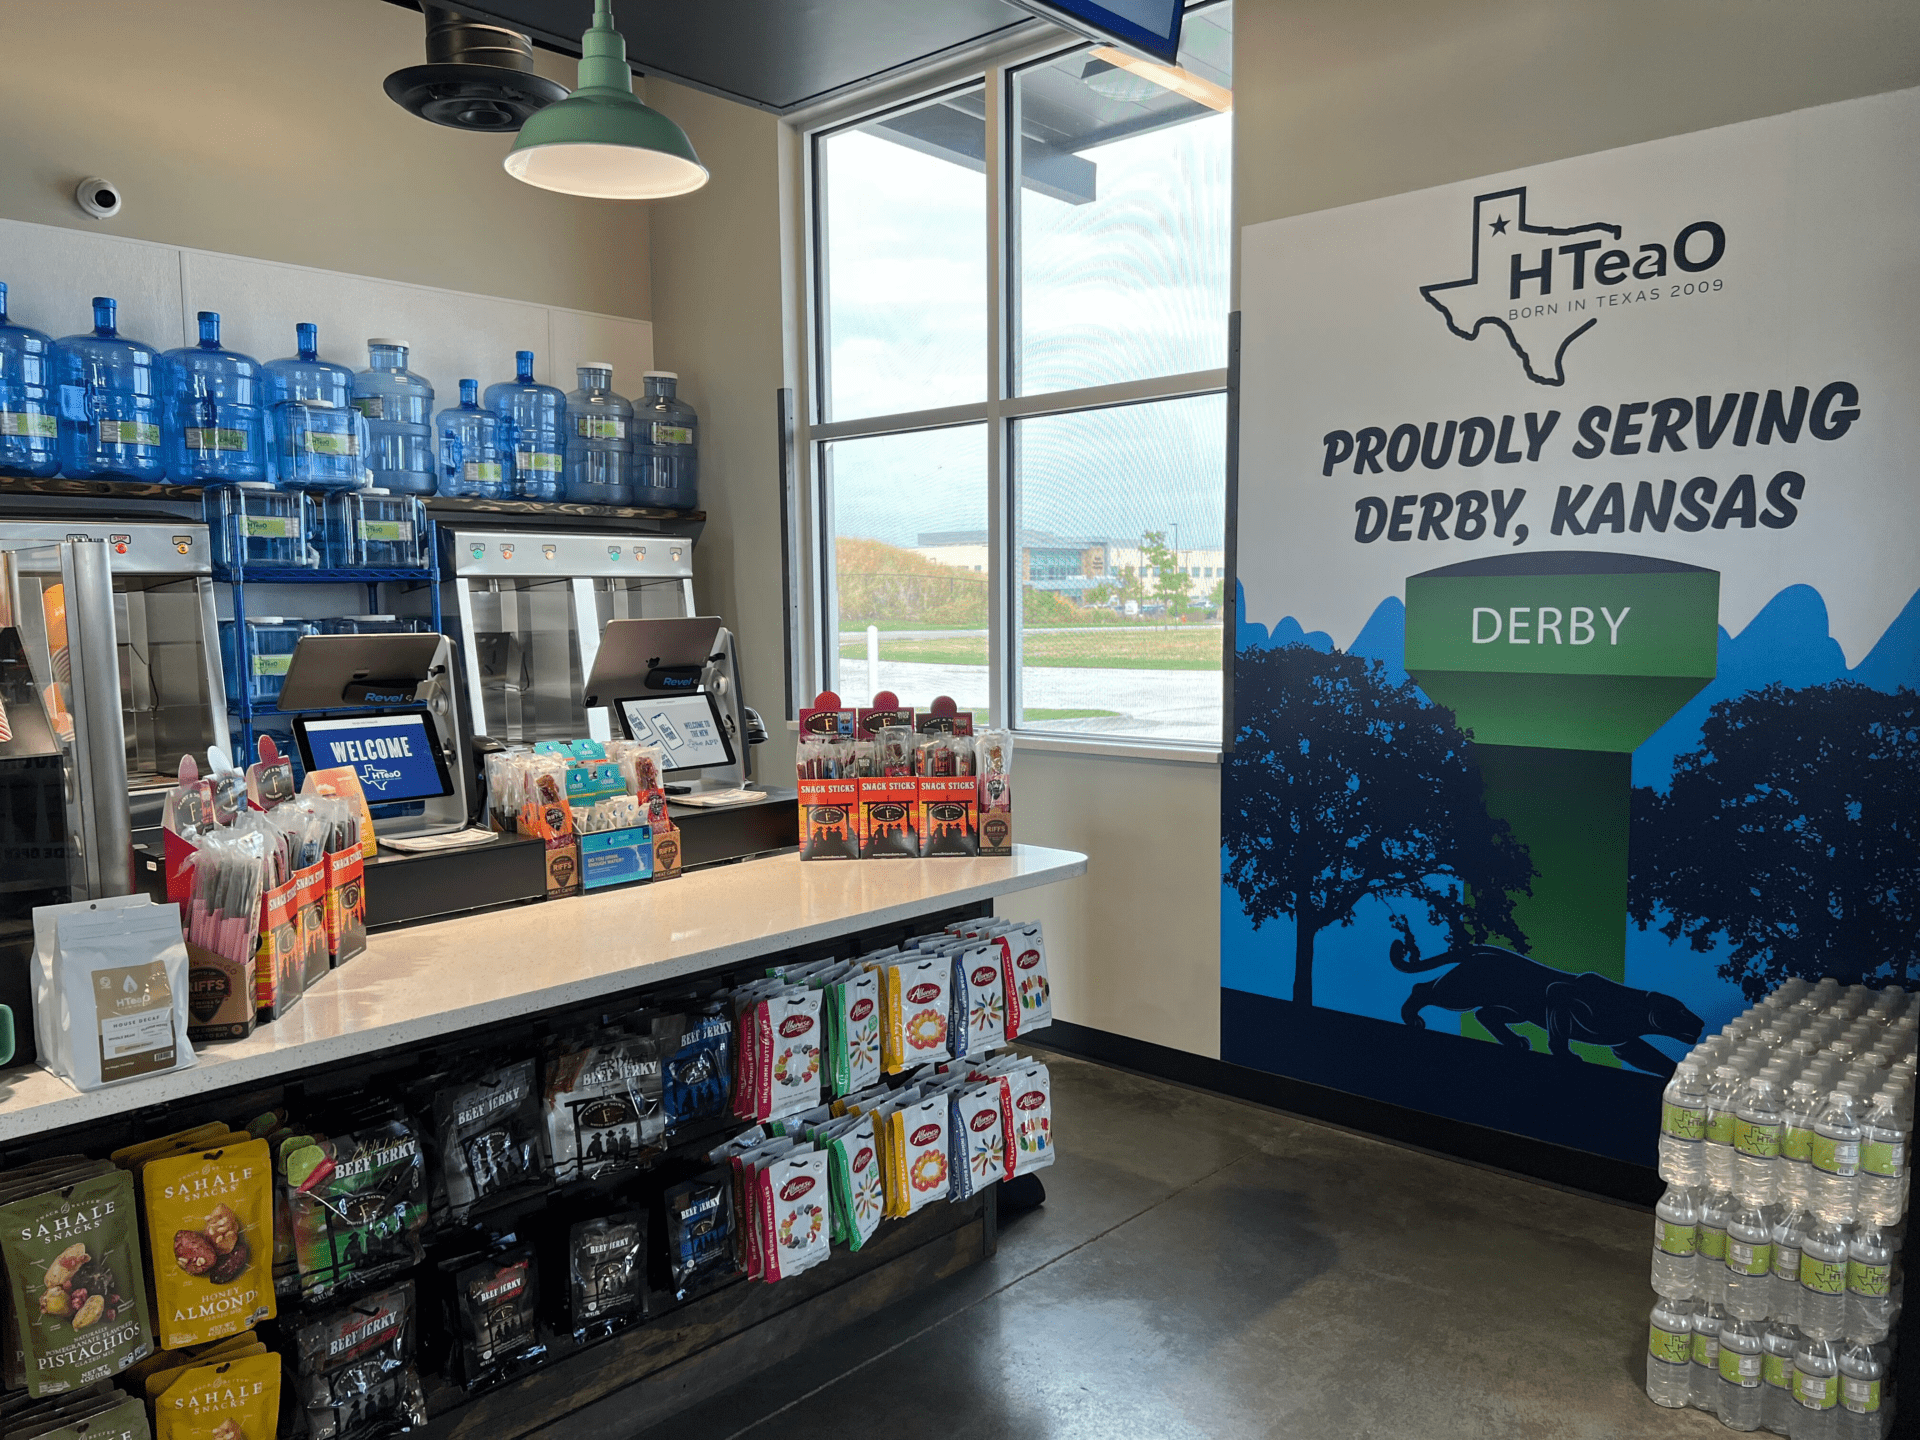 Checkout counter with snacks, a poster on the wall that says "Proudly Serving Derby, Kansas"